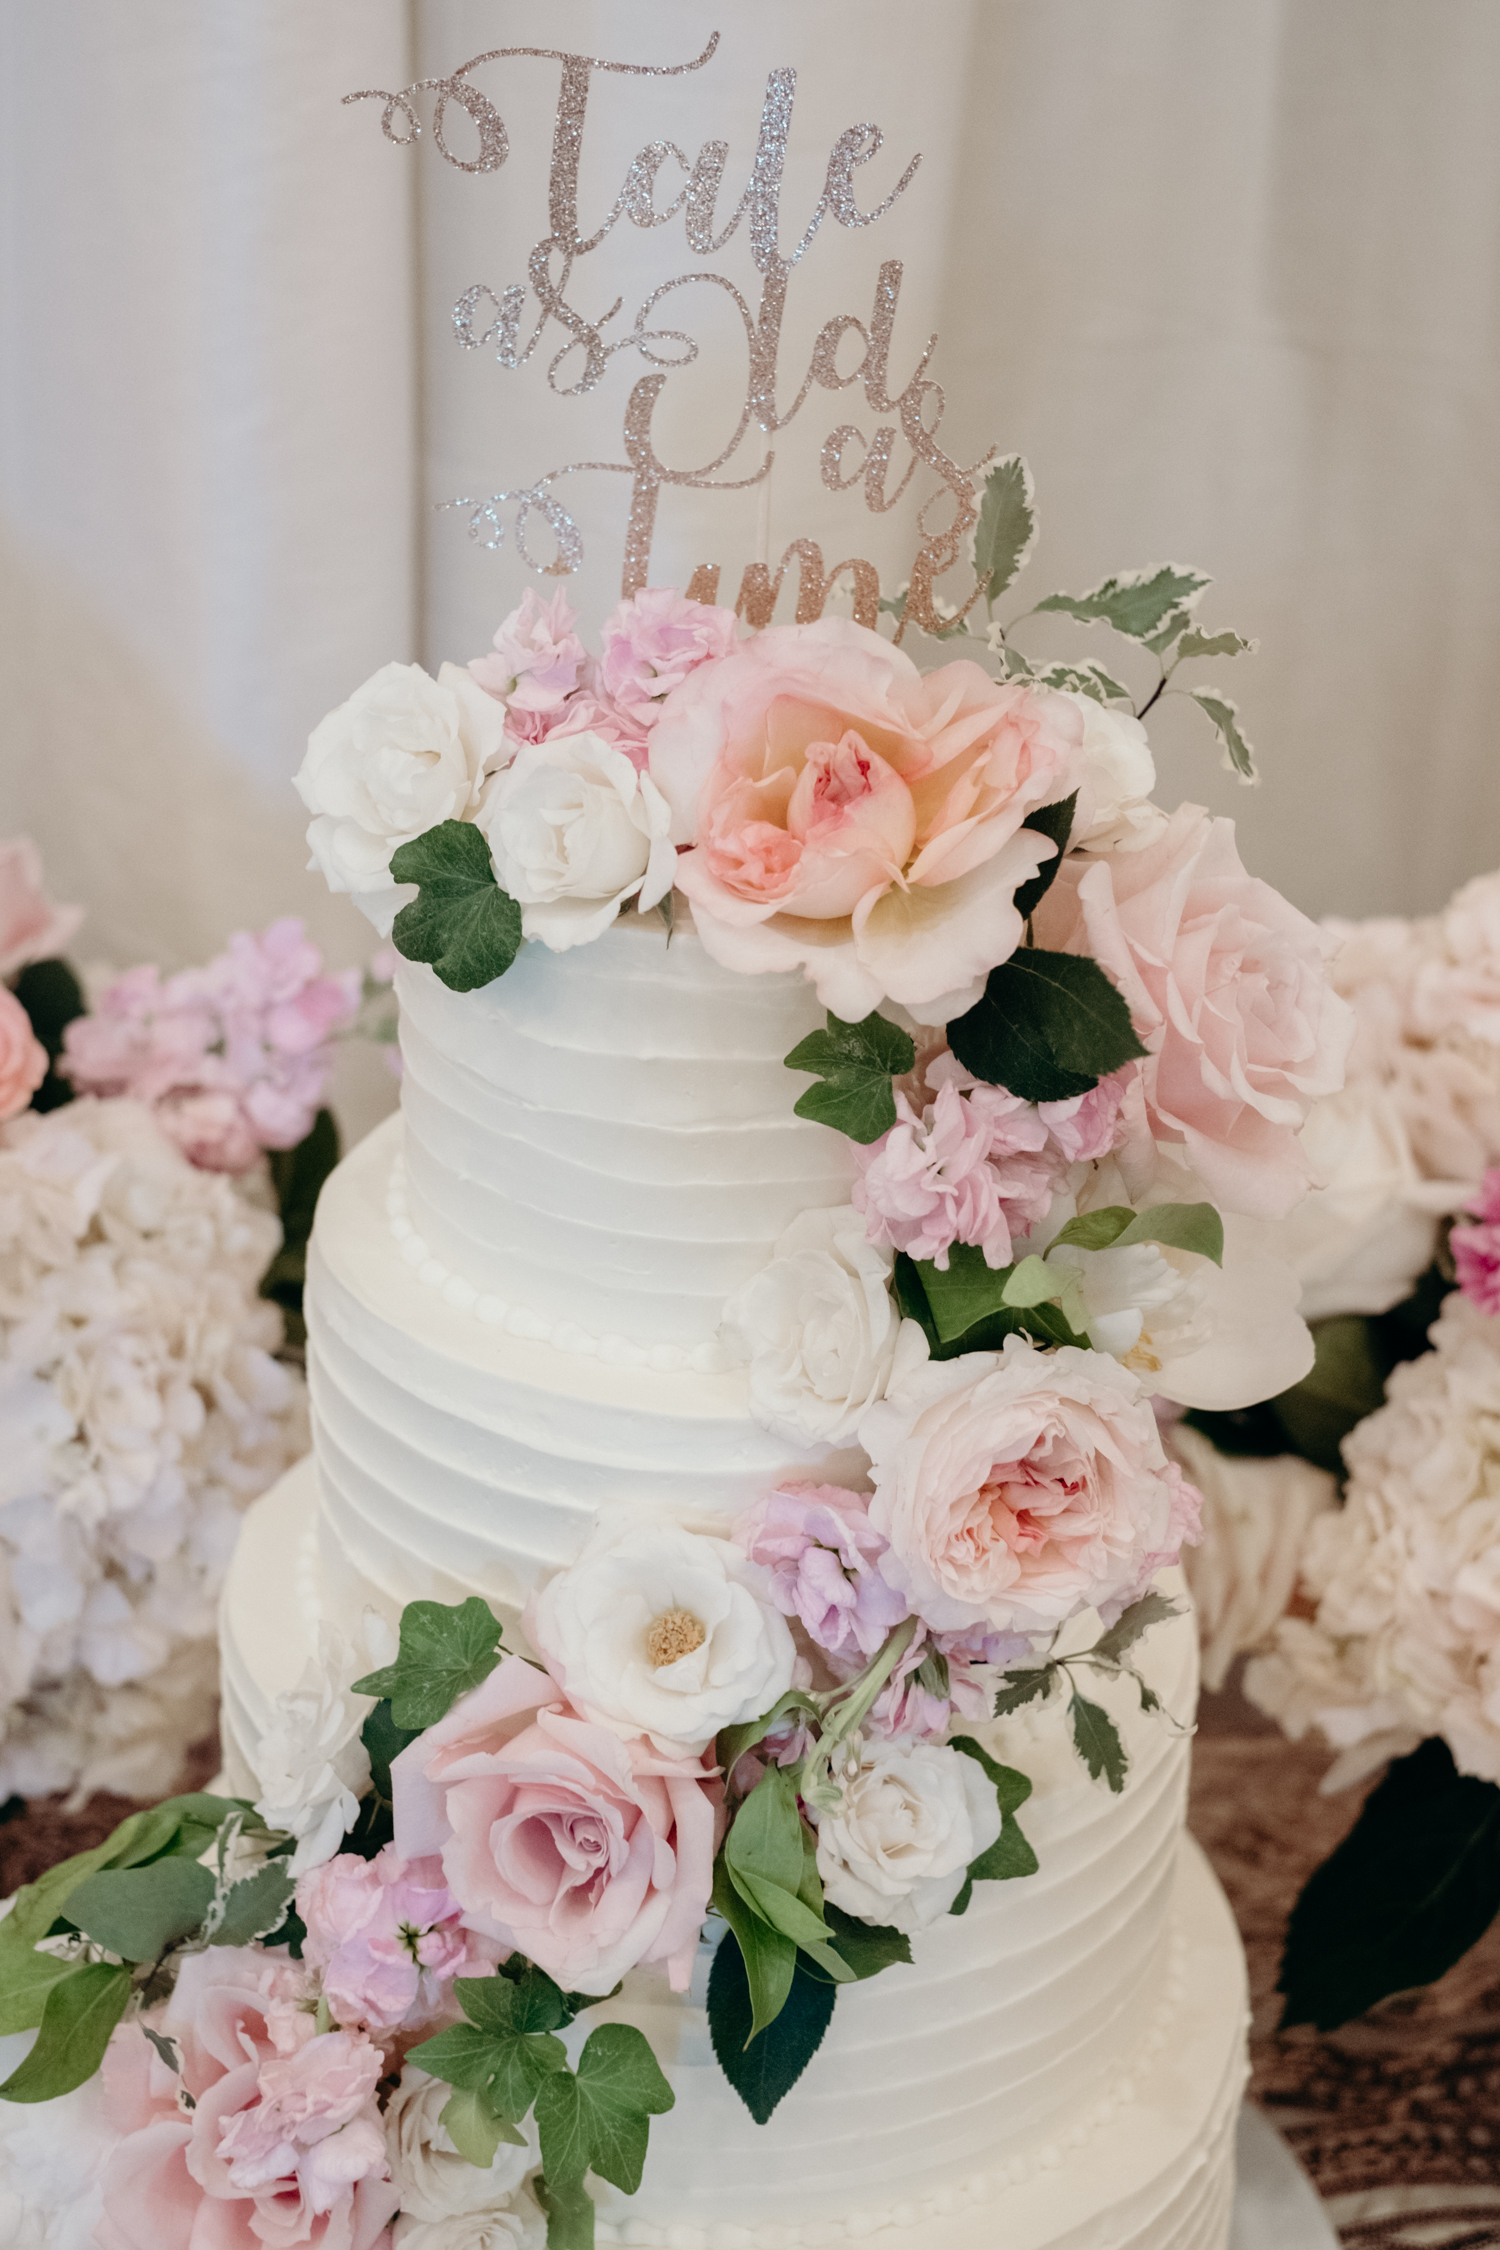 A three-tiered white wedding cake is adorned with pink and white flowers.